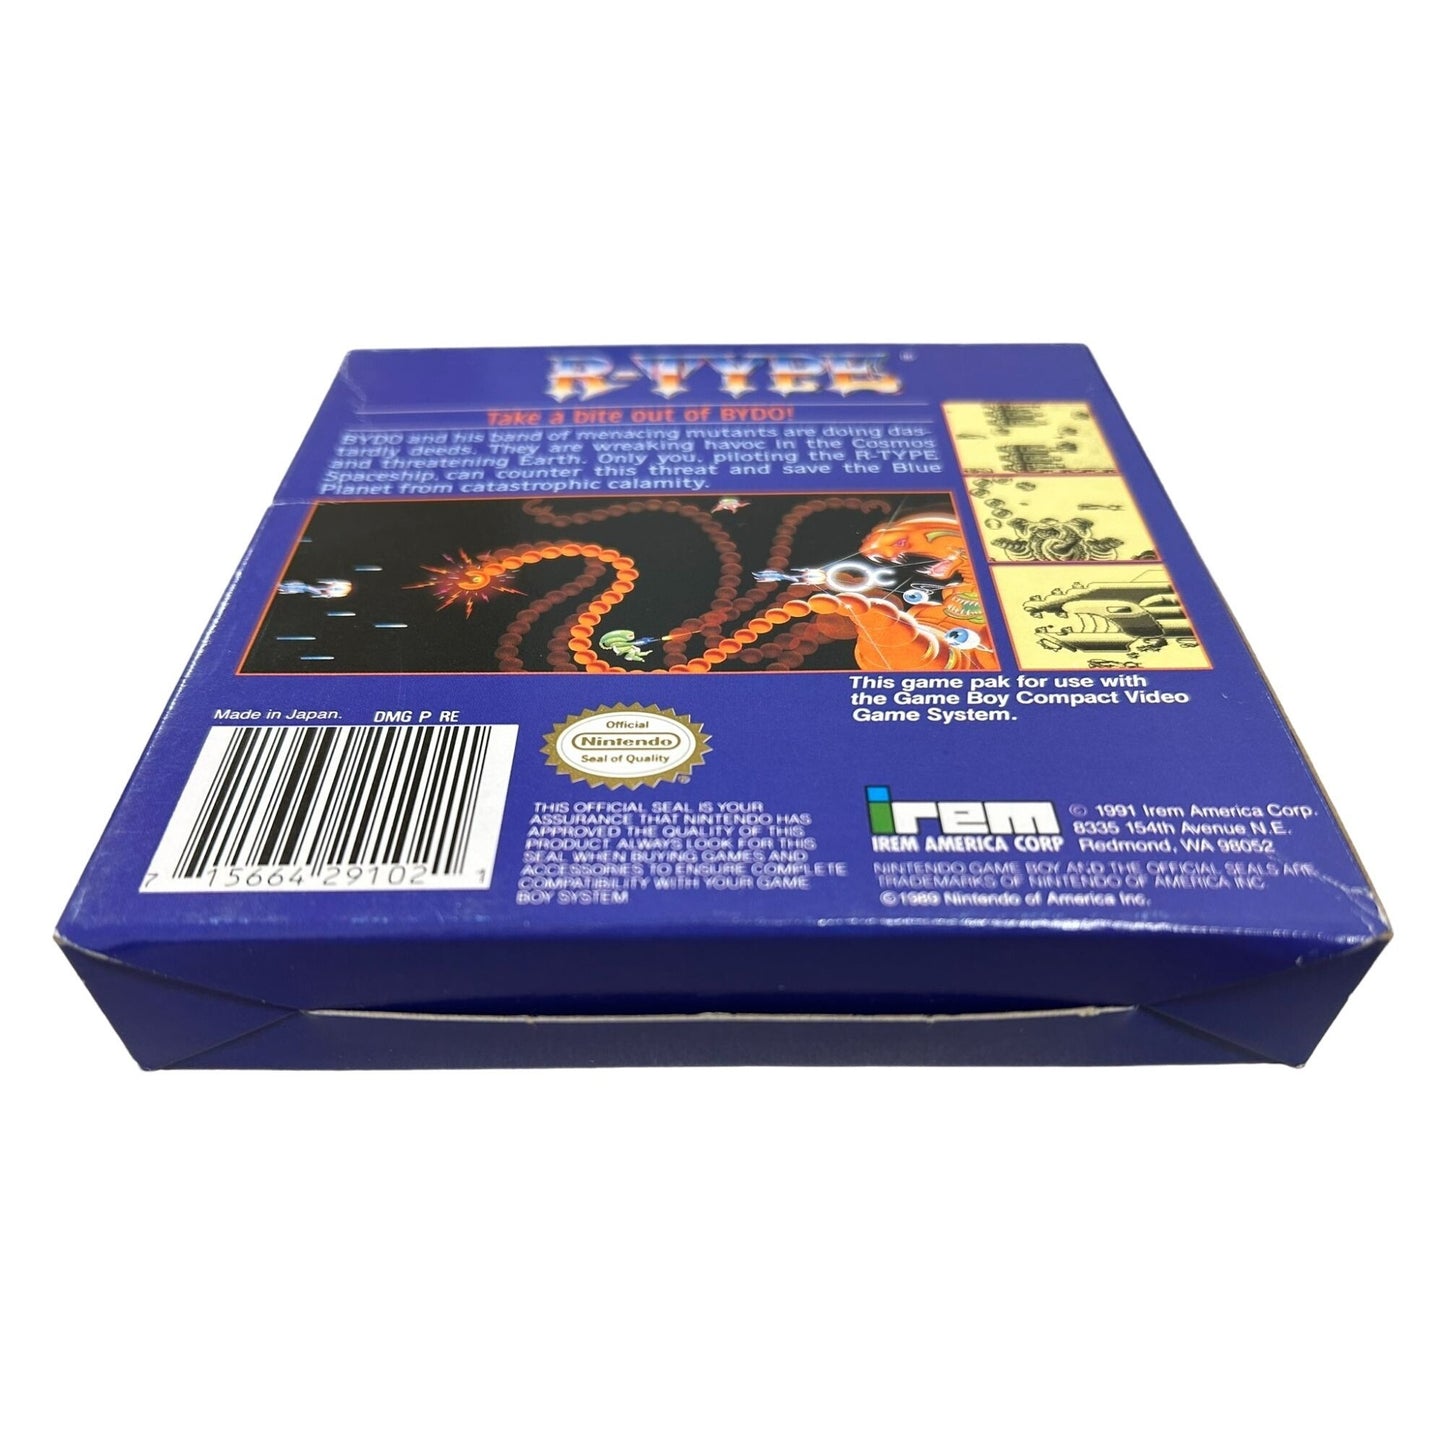 R-Type (Gameboy 1989) Box, Manual and Game GOOD CONDITION!